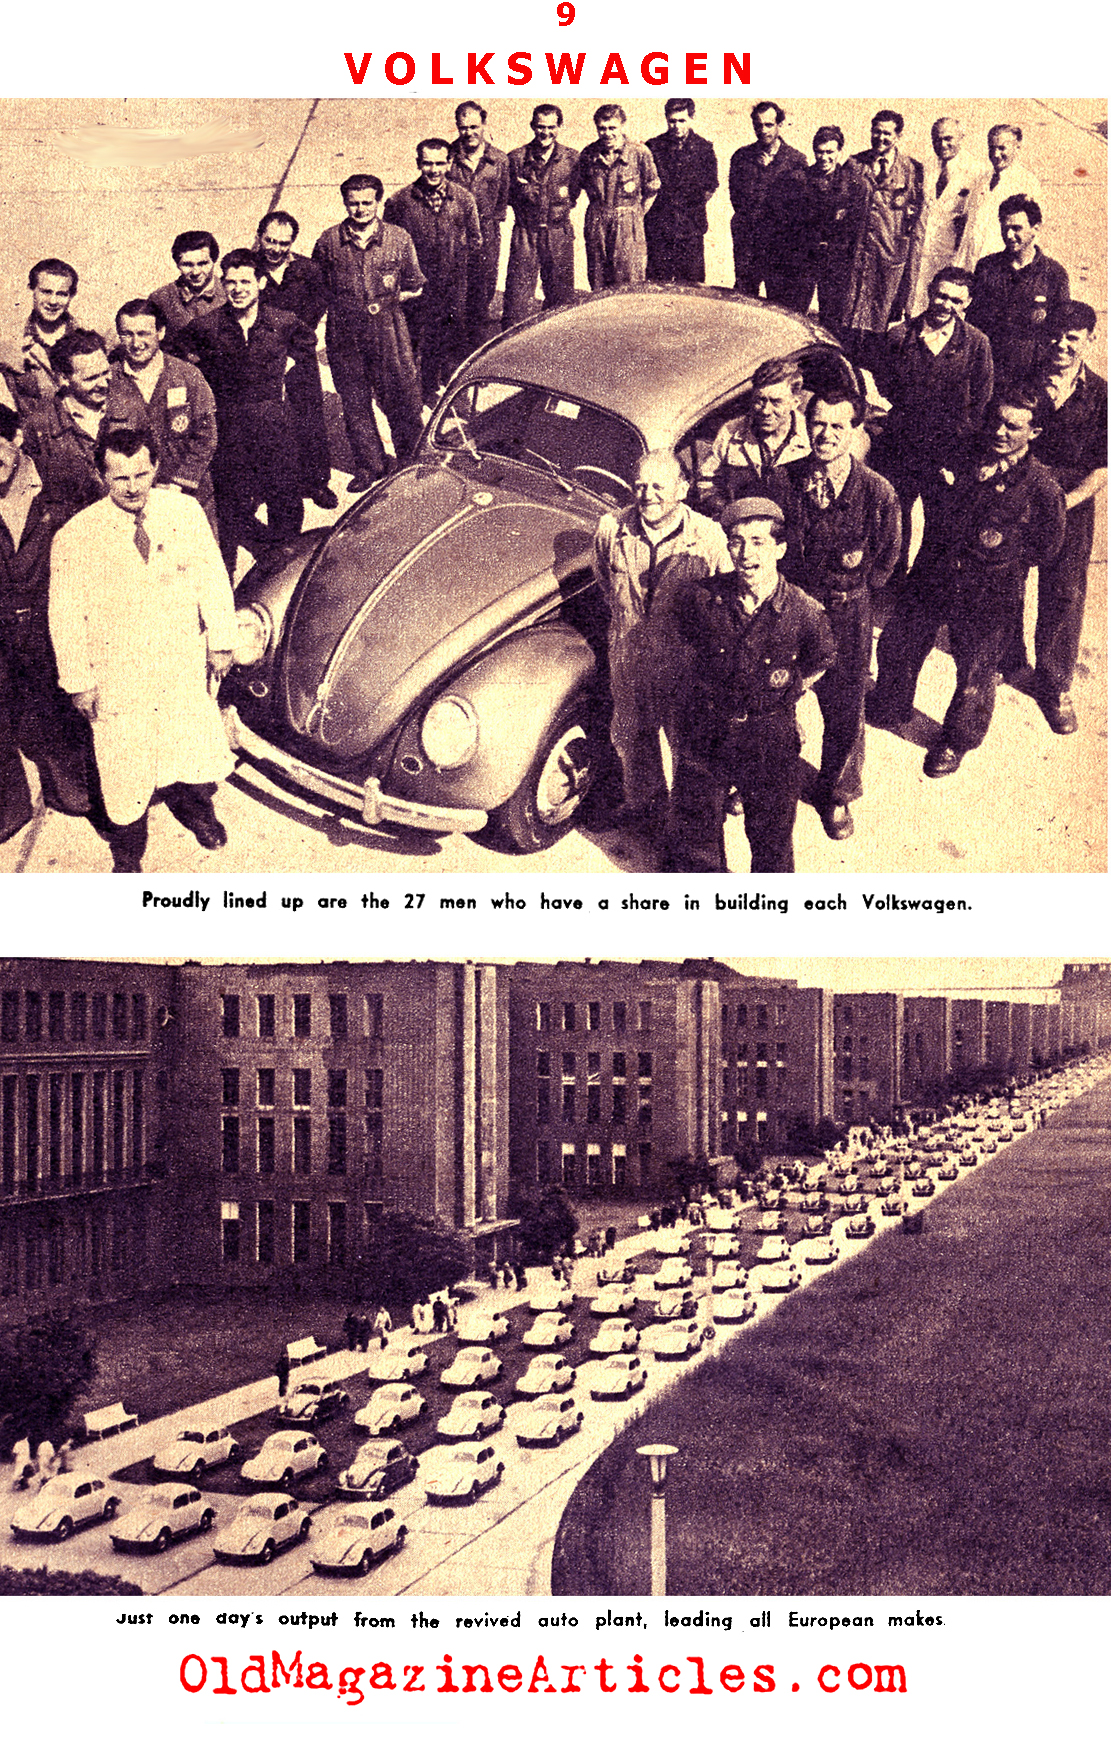 The Post-War Miracle that was Volkswagen  (Pic Magazine, 1955)